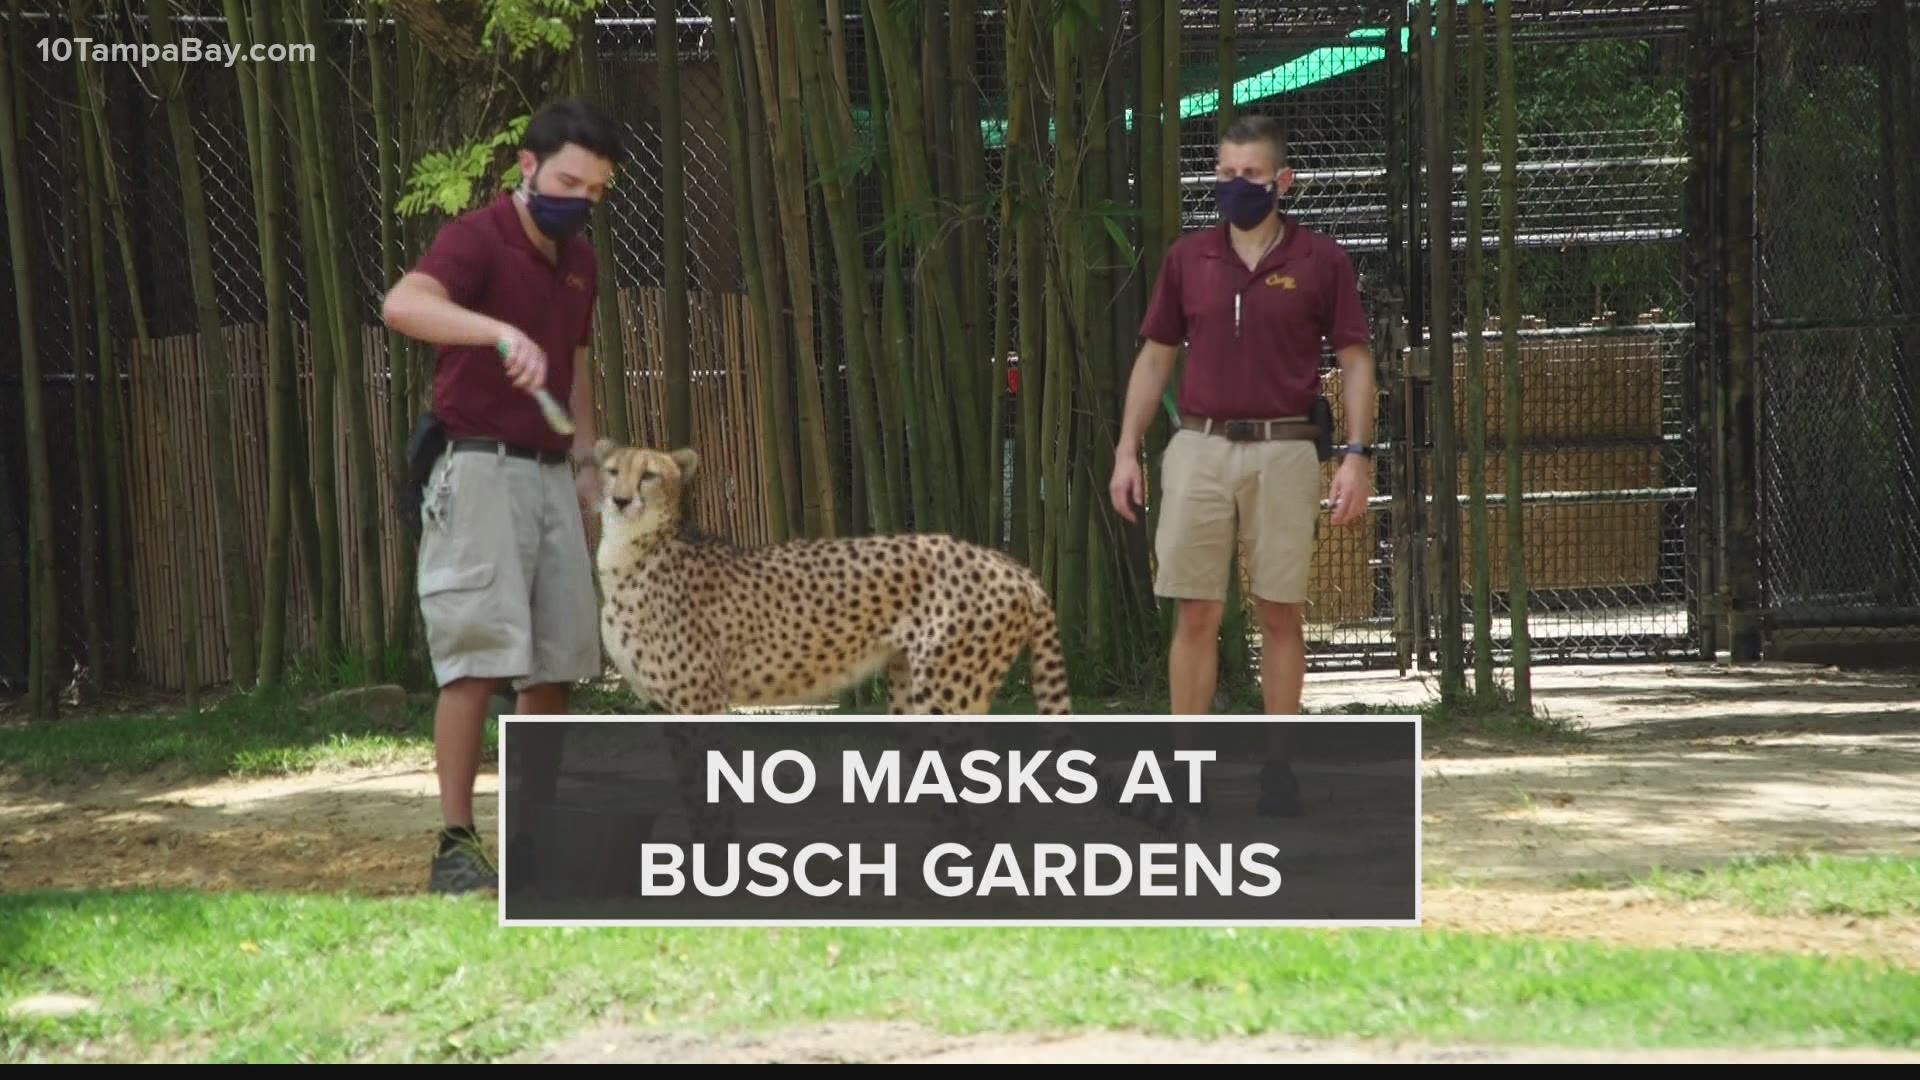 Park employees, however, still are asked to put on a face covering.